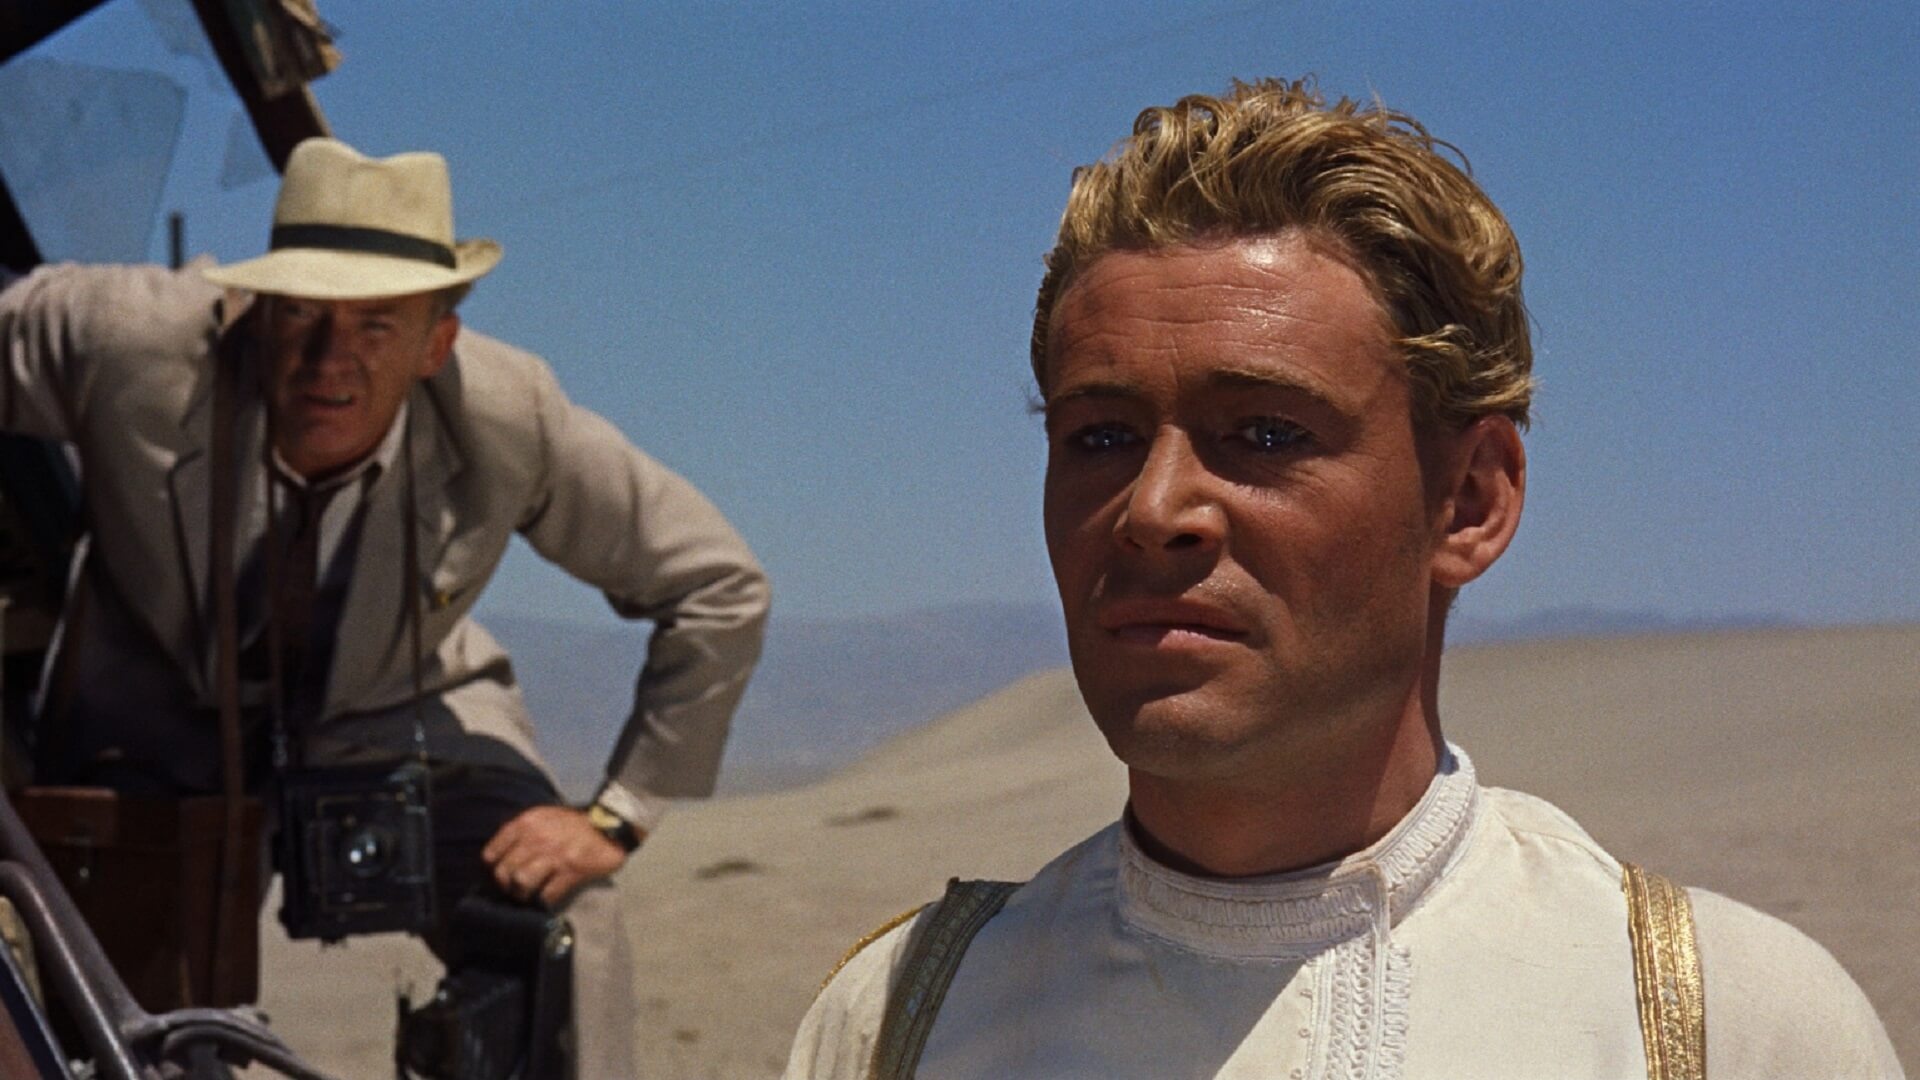 Lawrence of Arabia: The film was nominated for ten Oscars at the 35th Academy Awards in 1963. 1920x1080 Full HD Background.